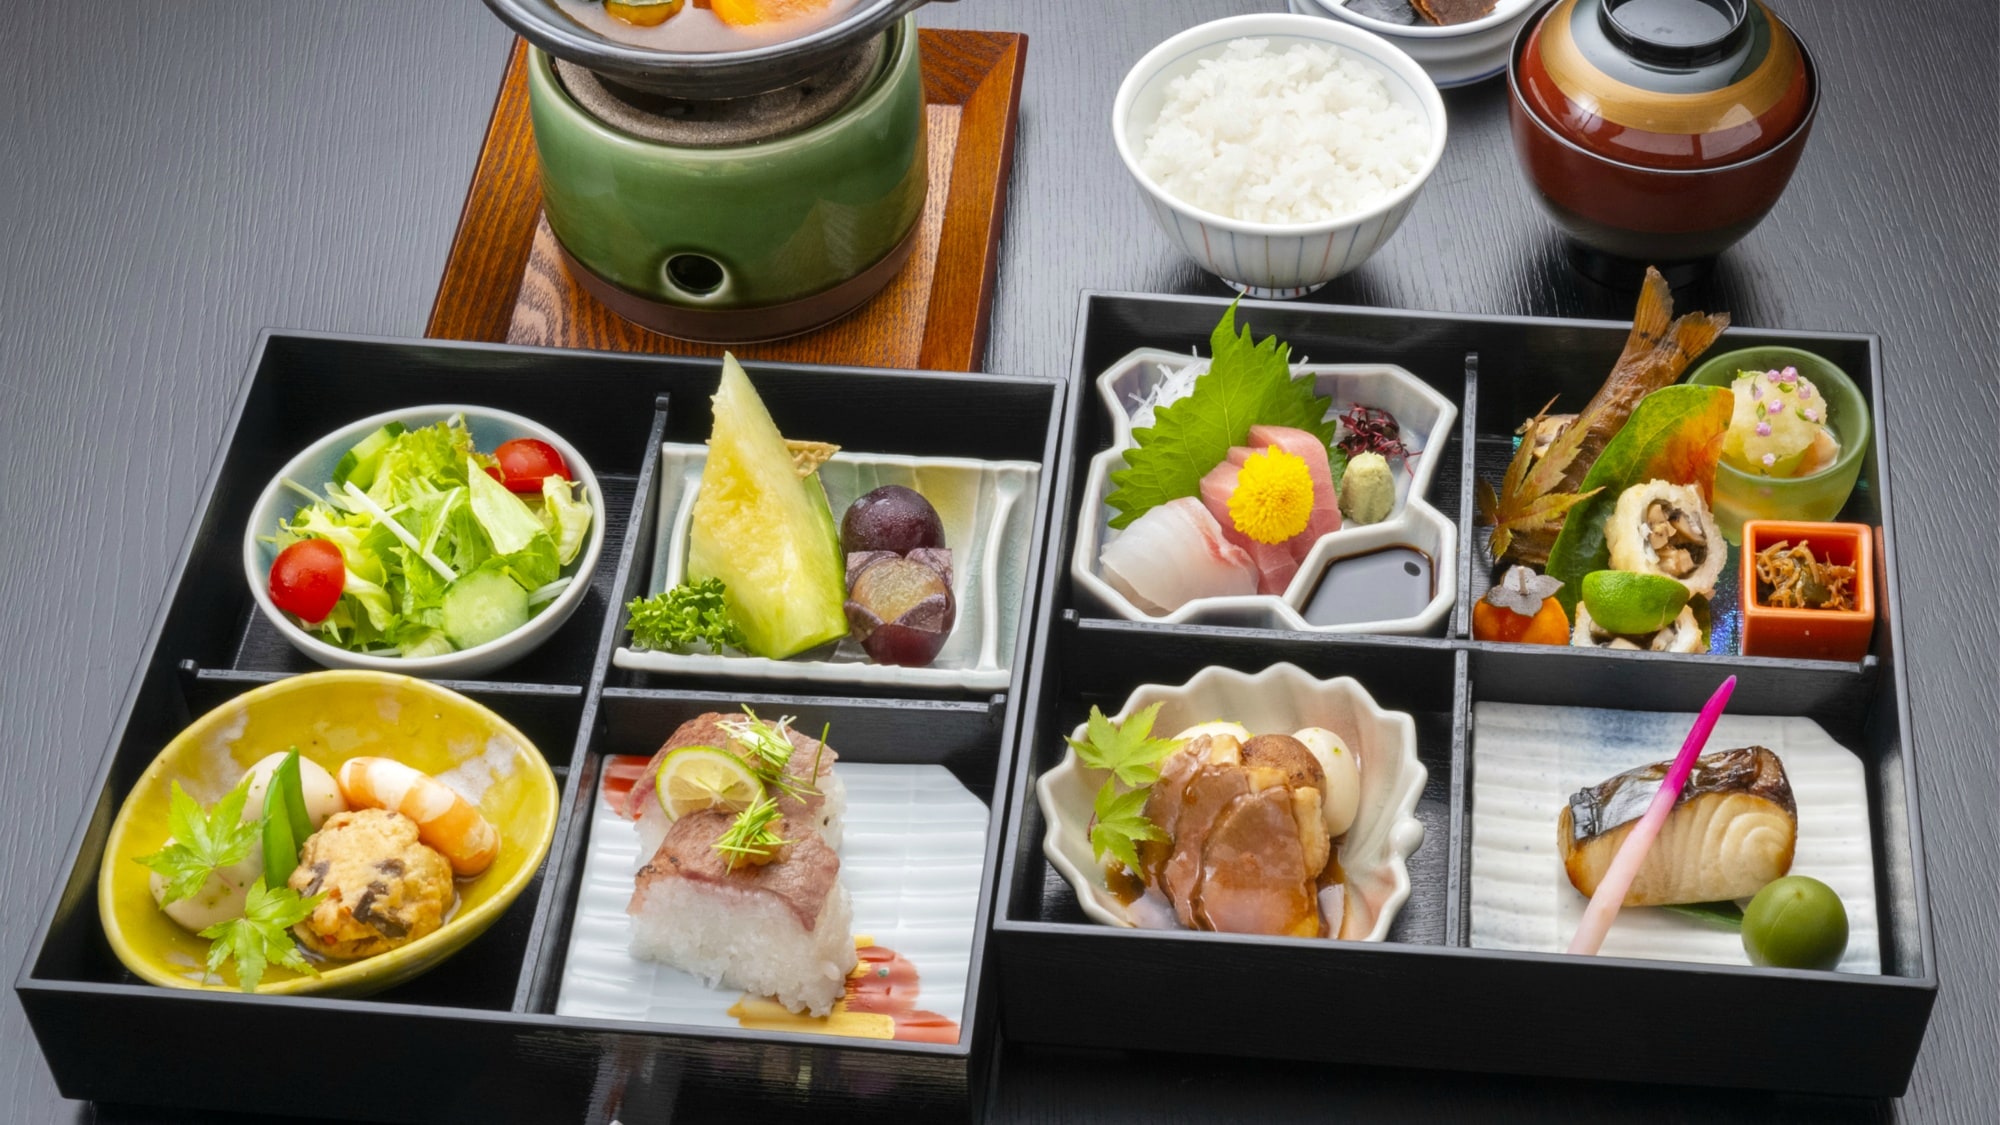 Omomori Plan [Autumn / Winter Supper Example] Please enjoy the "luxury jubako bento" packed with items carefully selected by the chef in your room.